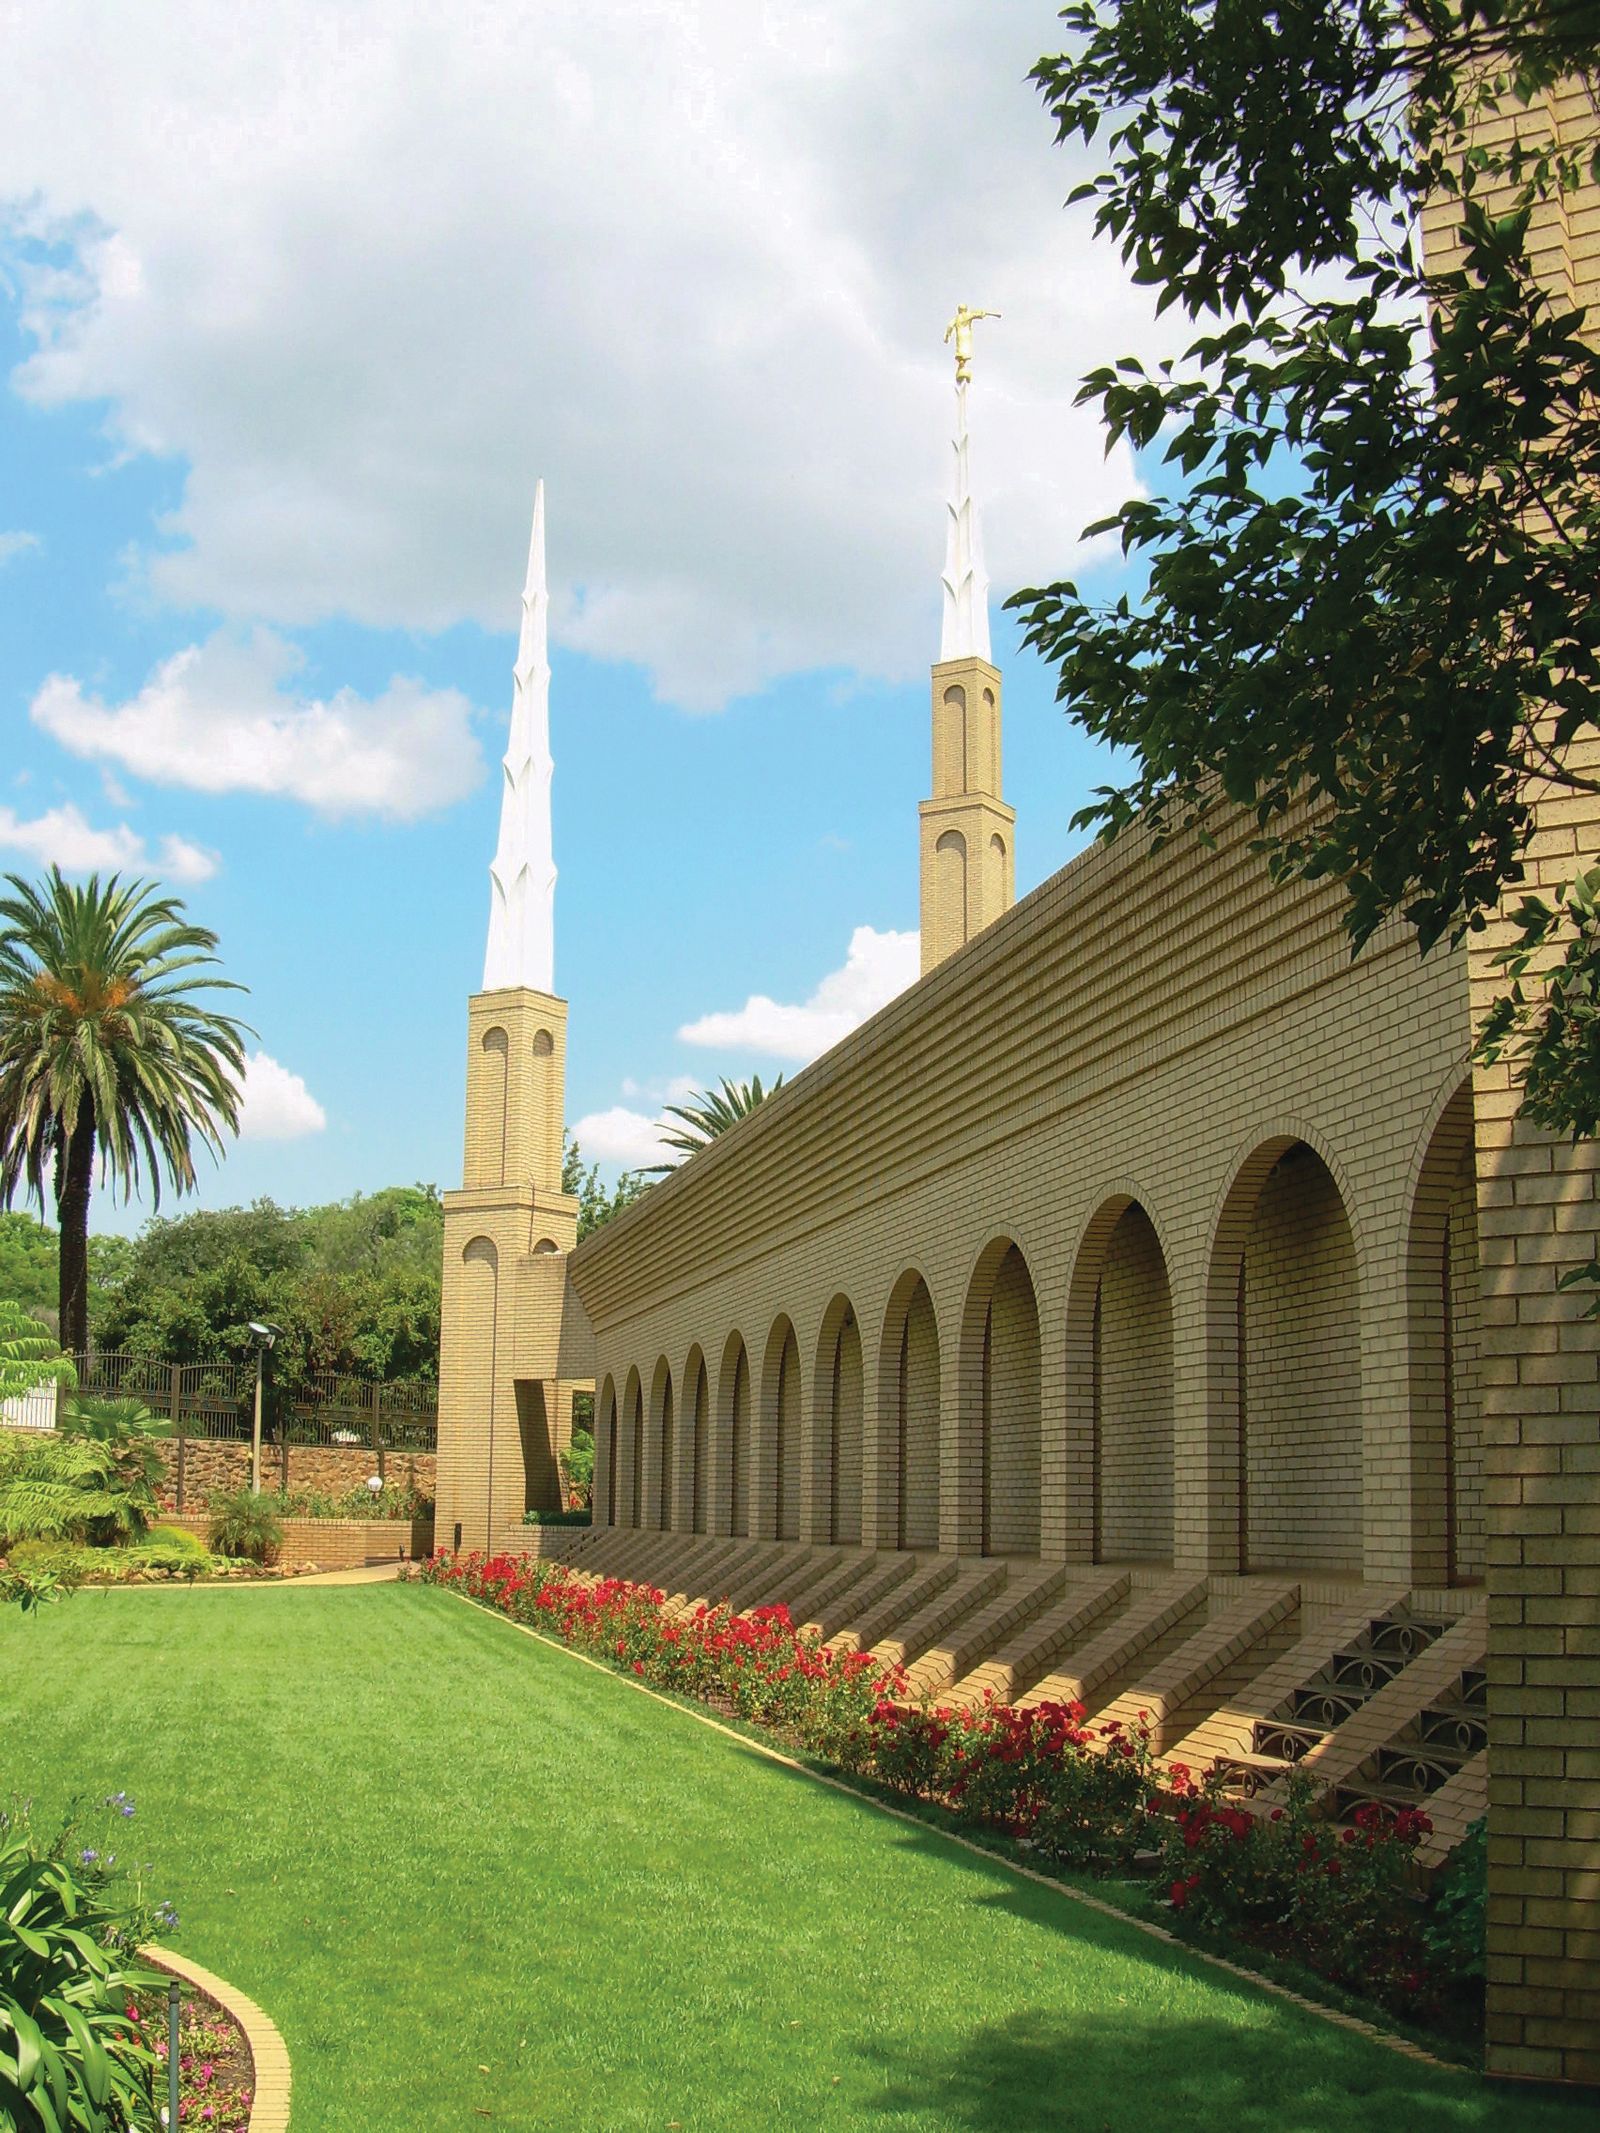 The Johannesburg South Africa Temple side view, including spires and scenery.